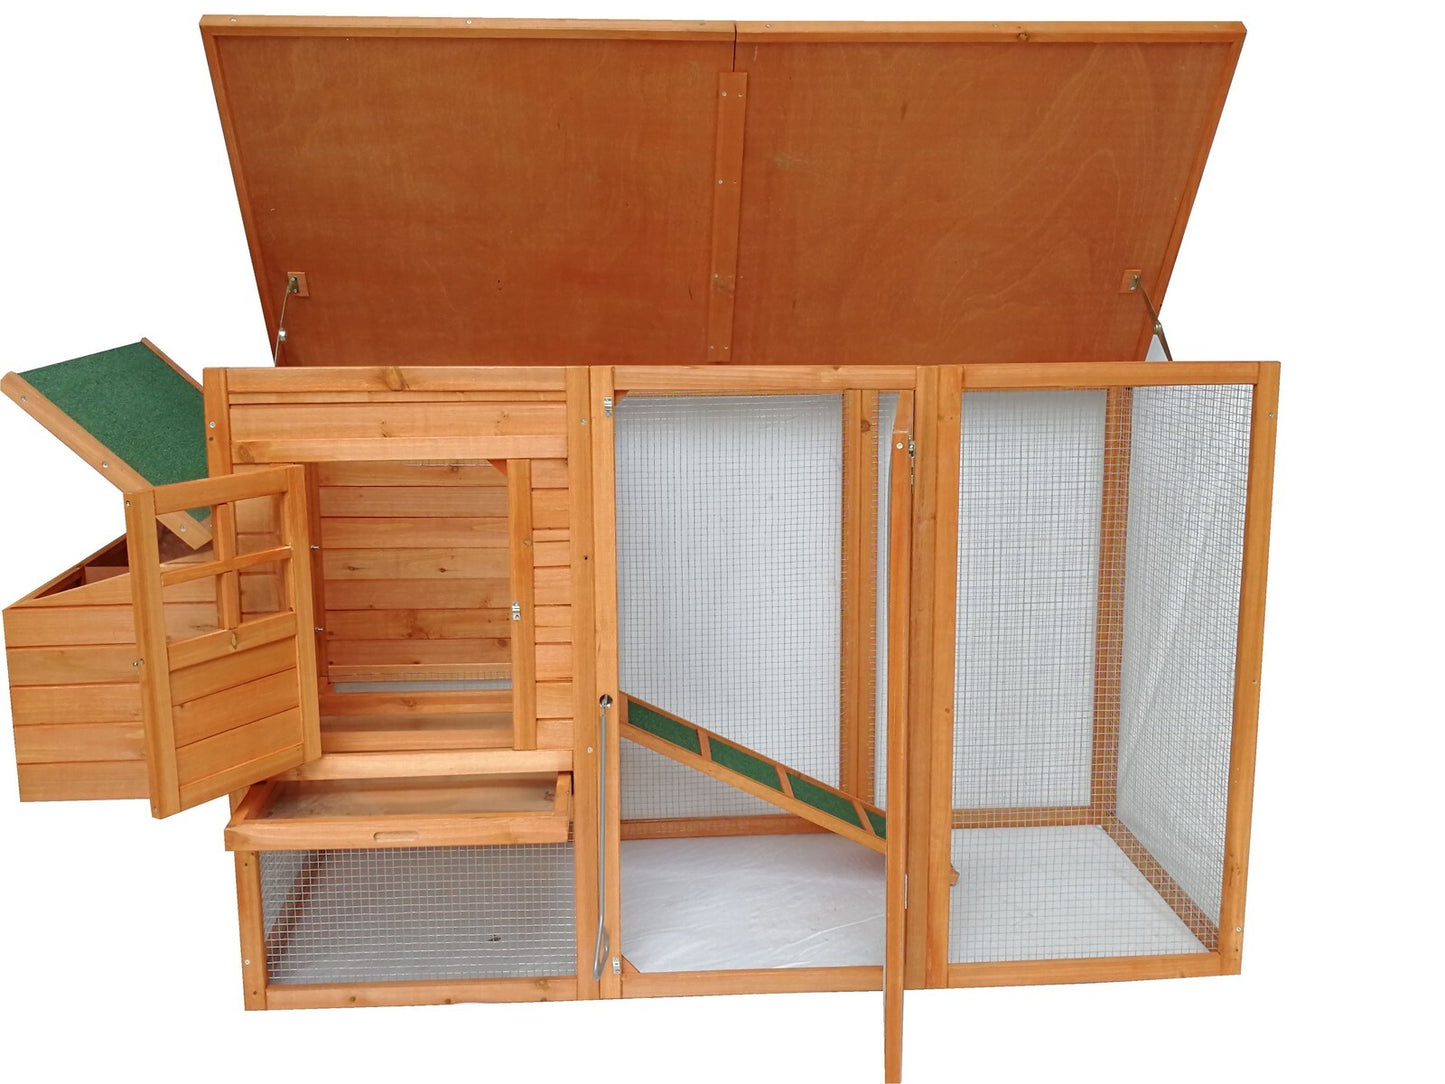 Large Wooden Chicken Coop Chook House With Open Roof